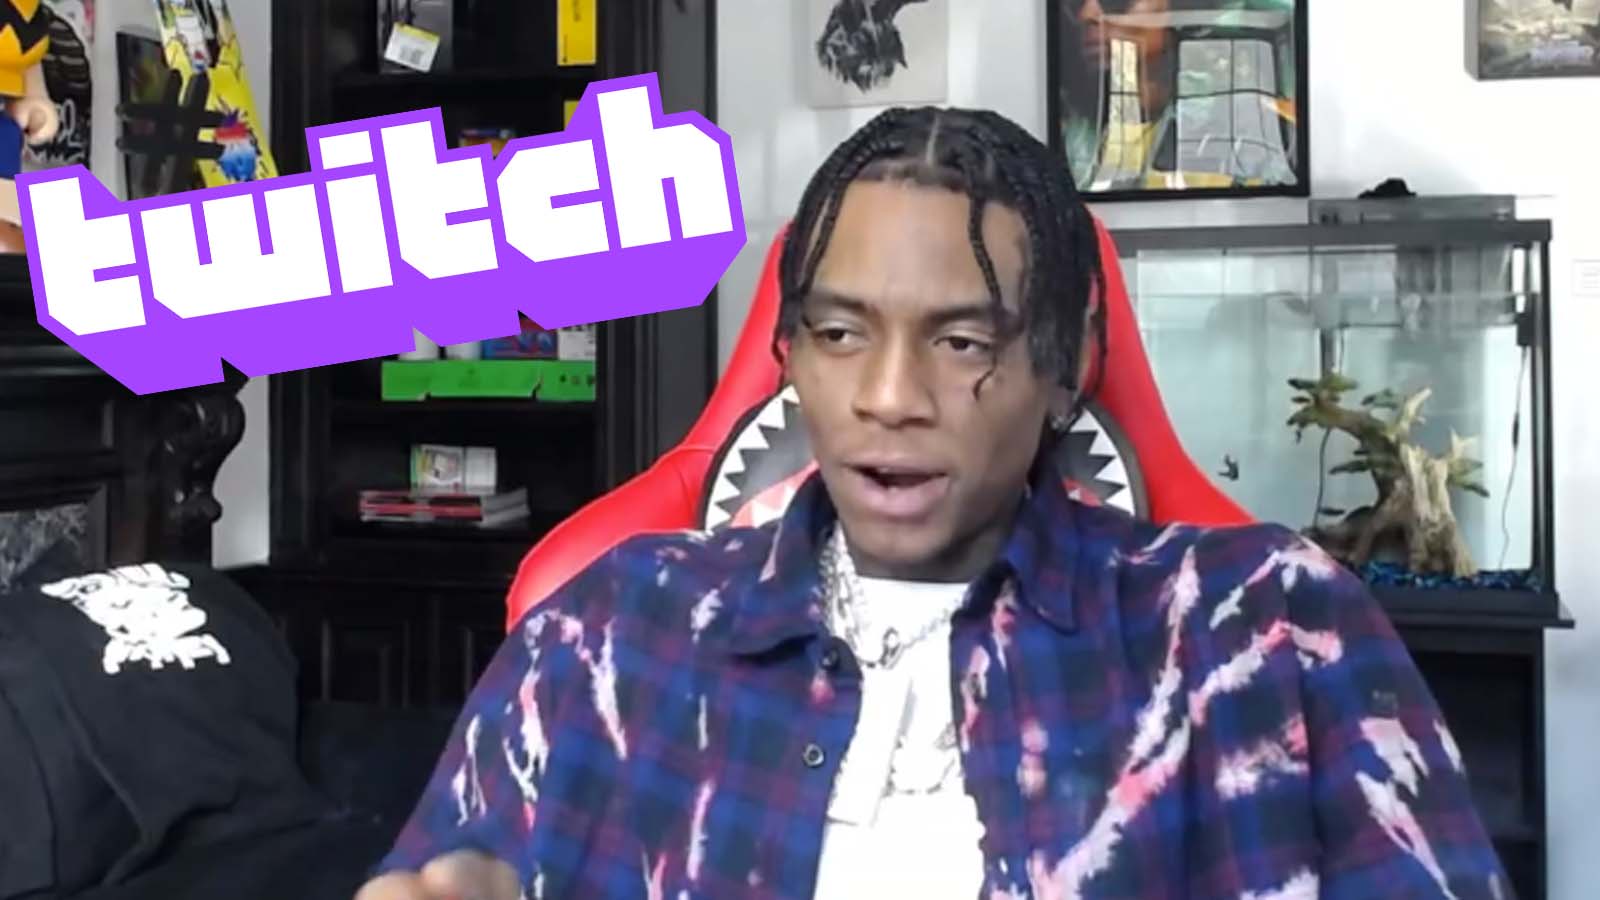 Soulja Boy freaks out after seeing his iconic dance move in World of  Warcraft - Dexerto